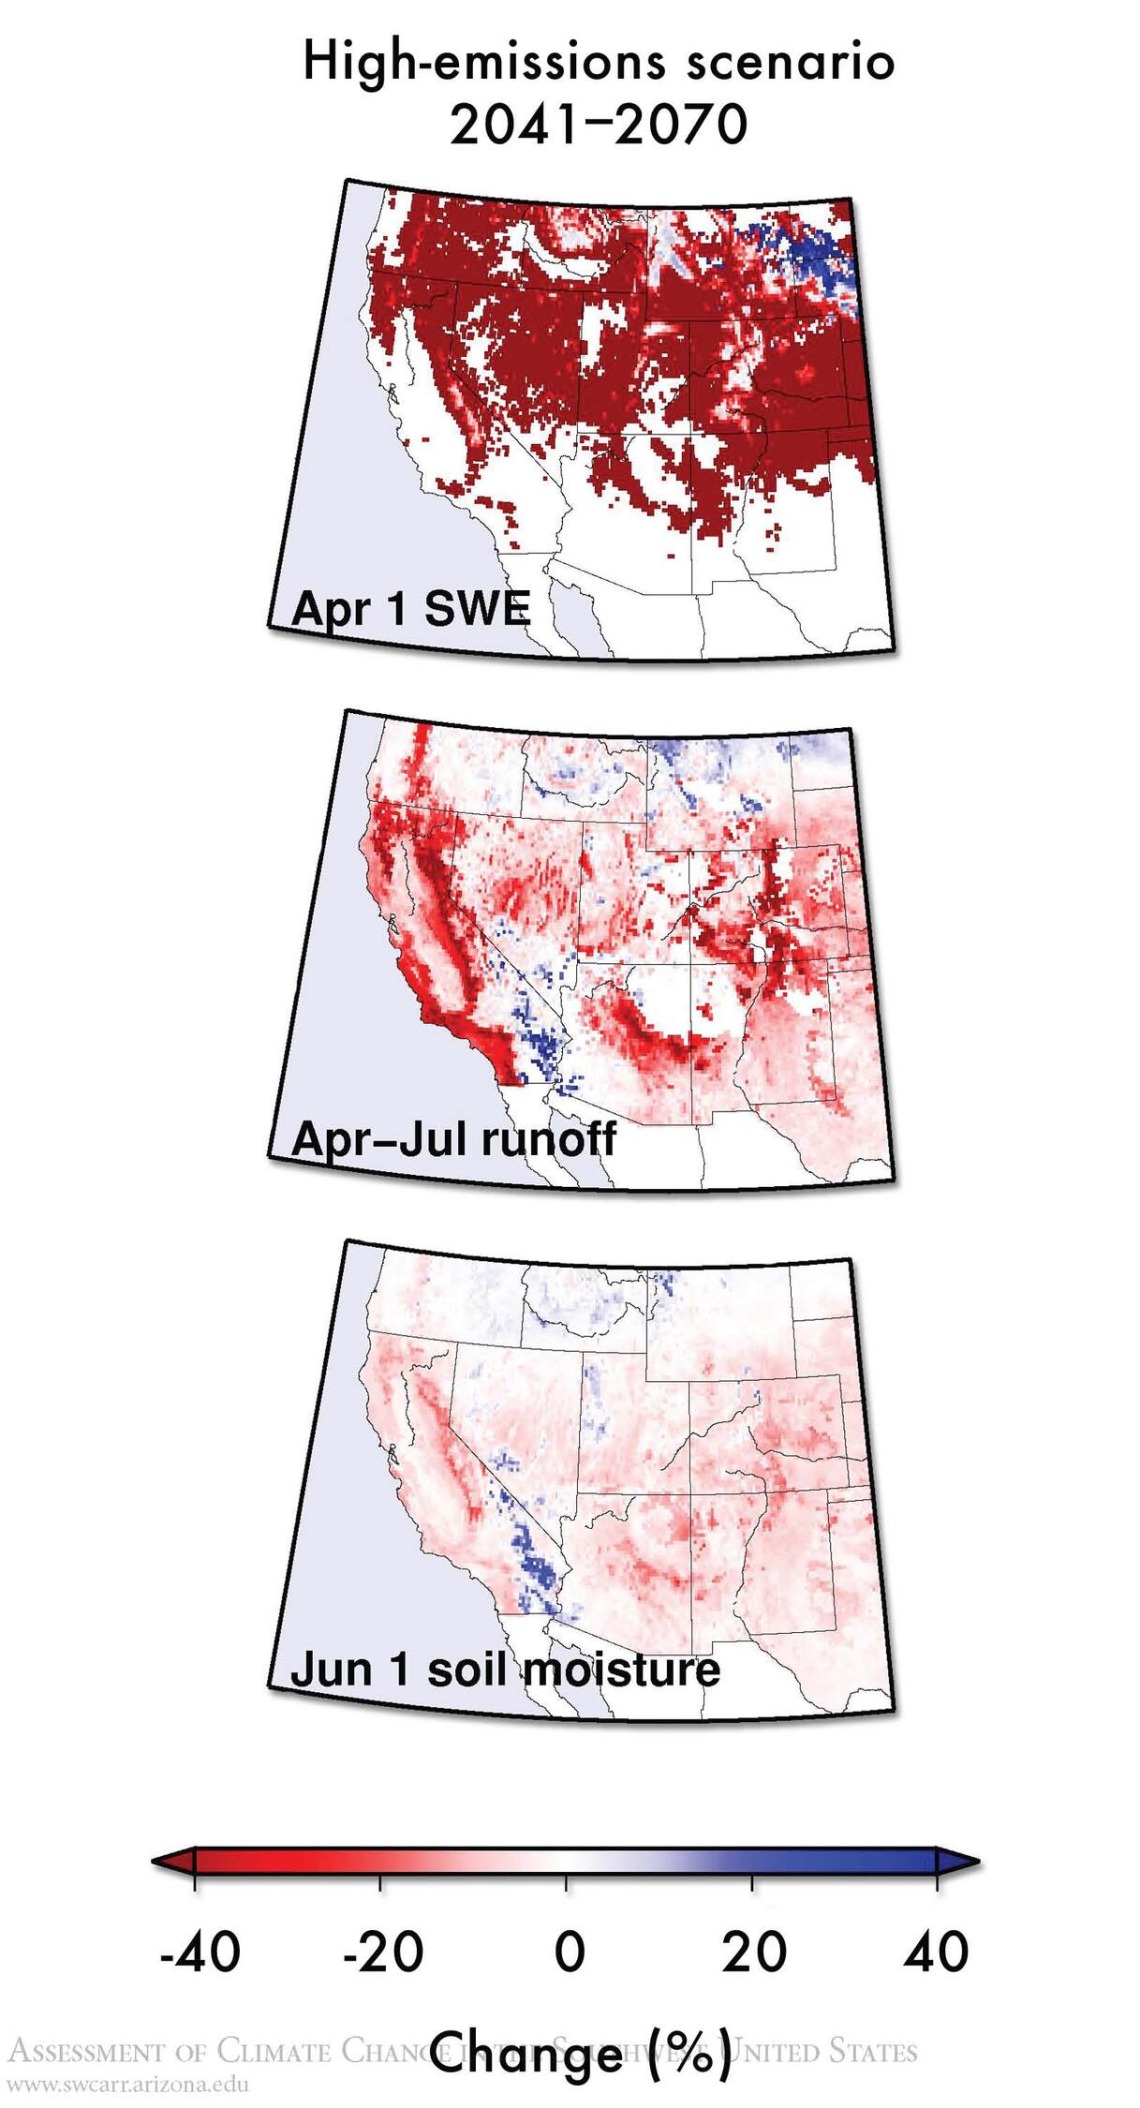 Figure 7 from Chapter 1 of Climate Assessment Report.